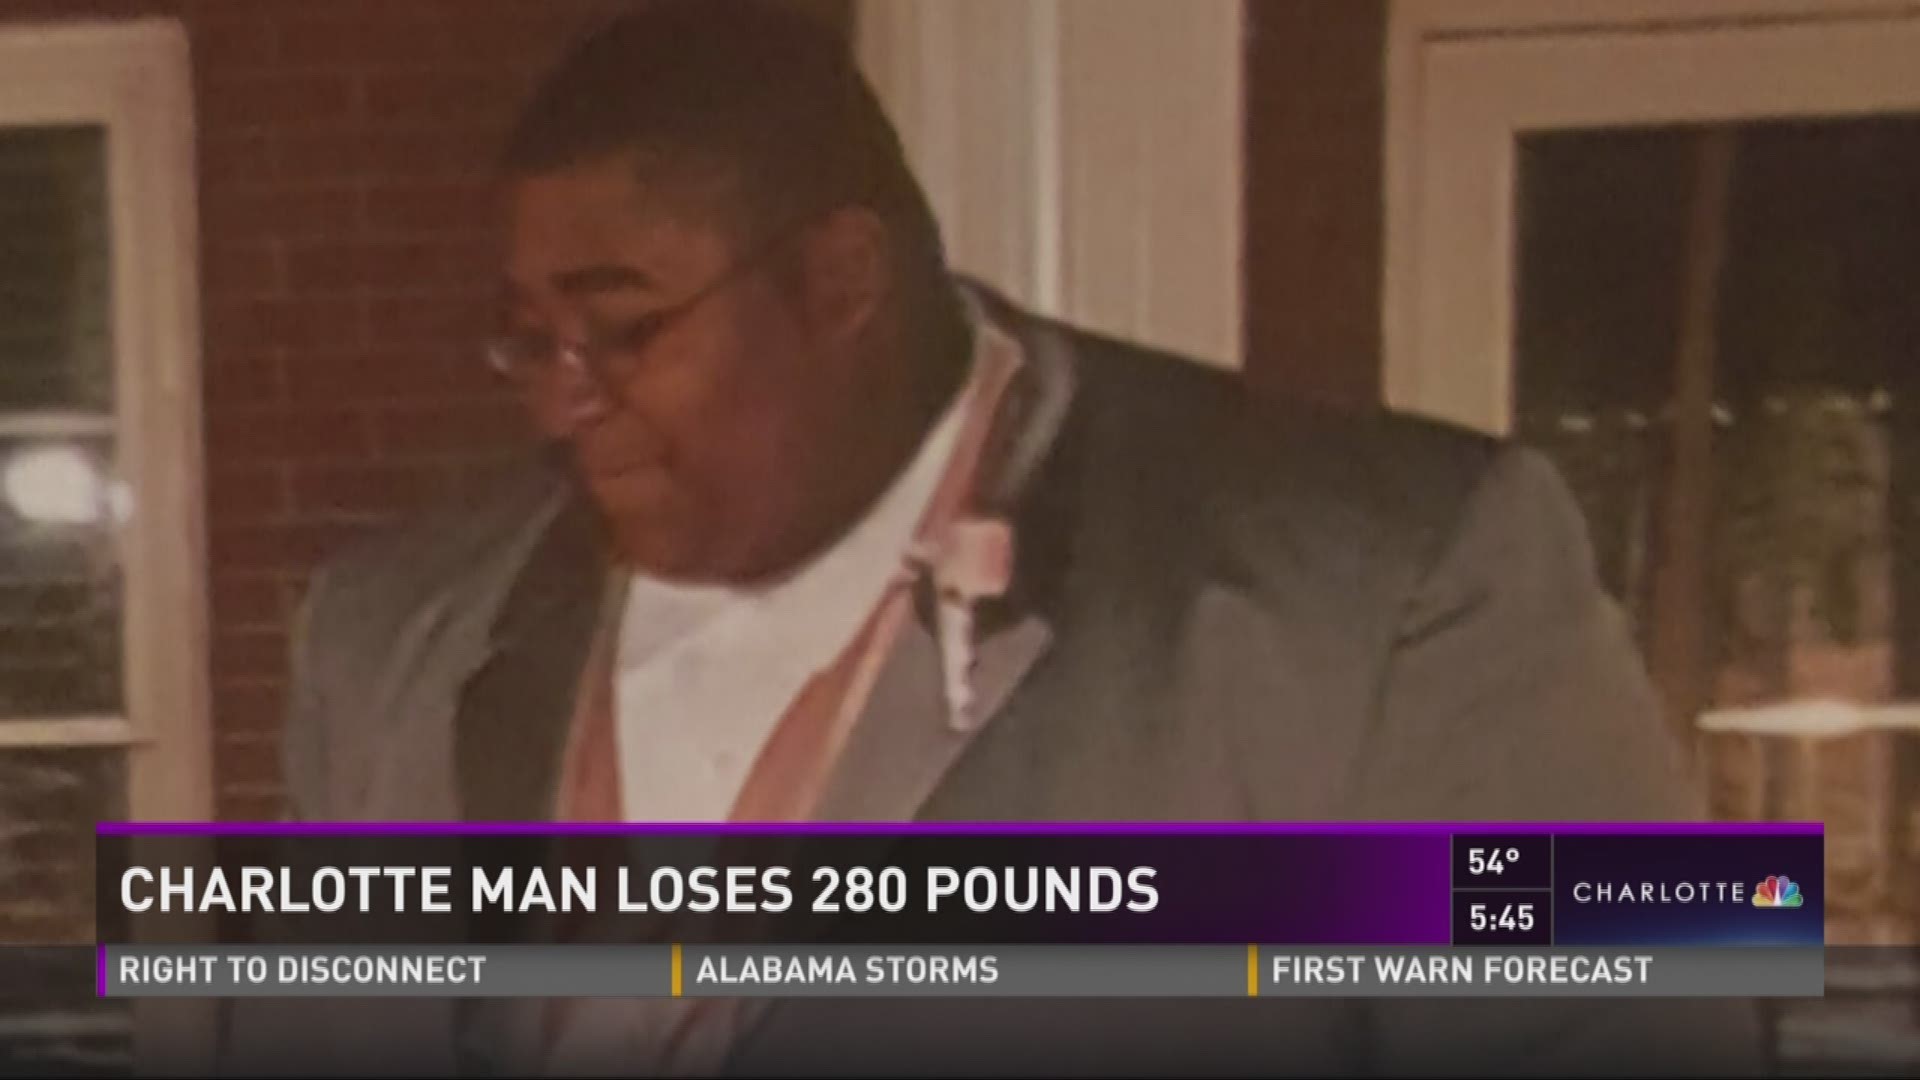 Charlotte man lost 280 pounds, now he helps inspire other to do the same.